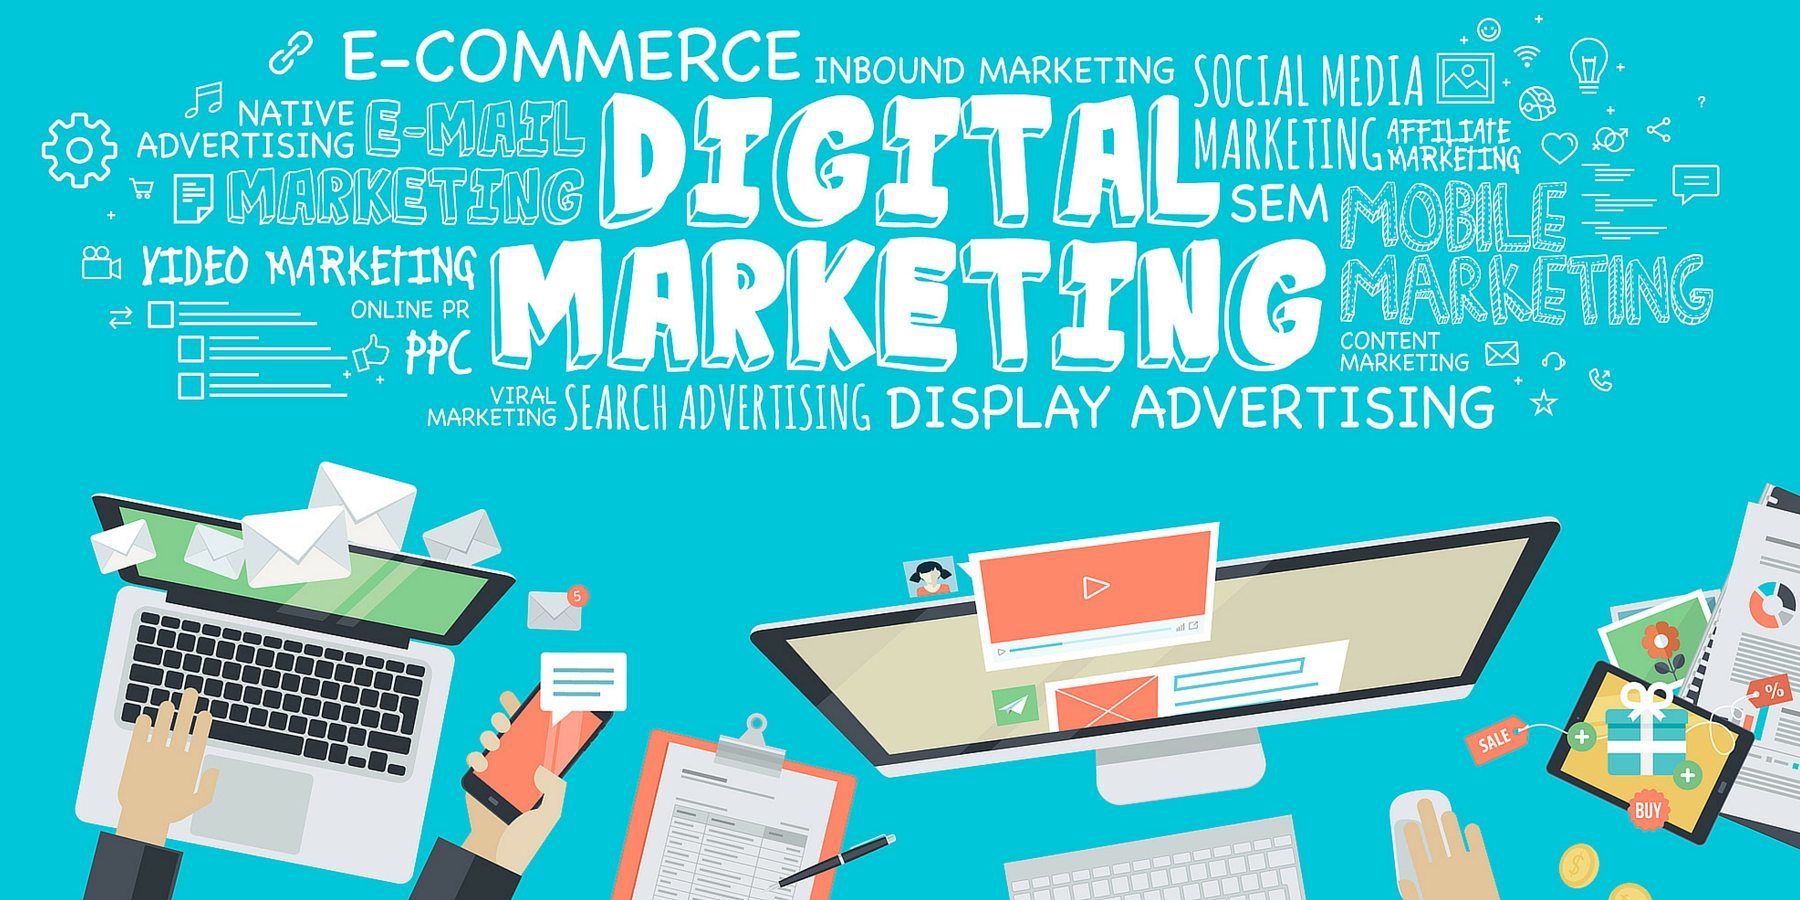 what-to-look-for-when-hiring-a-digital-marketing-agency.jpg